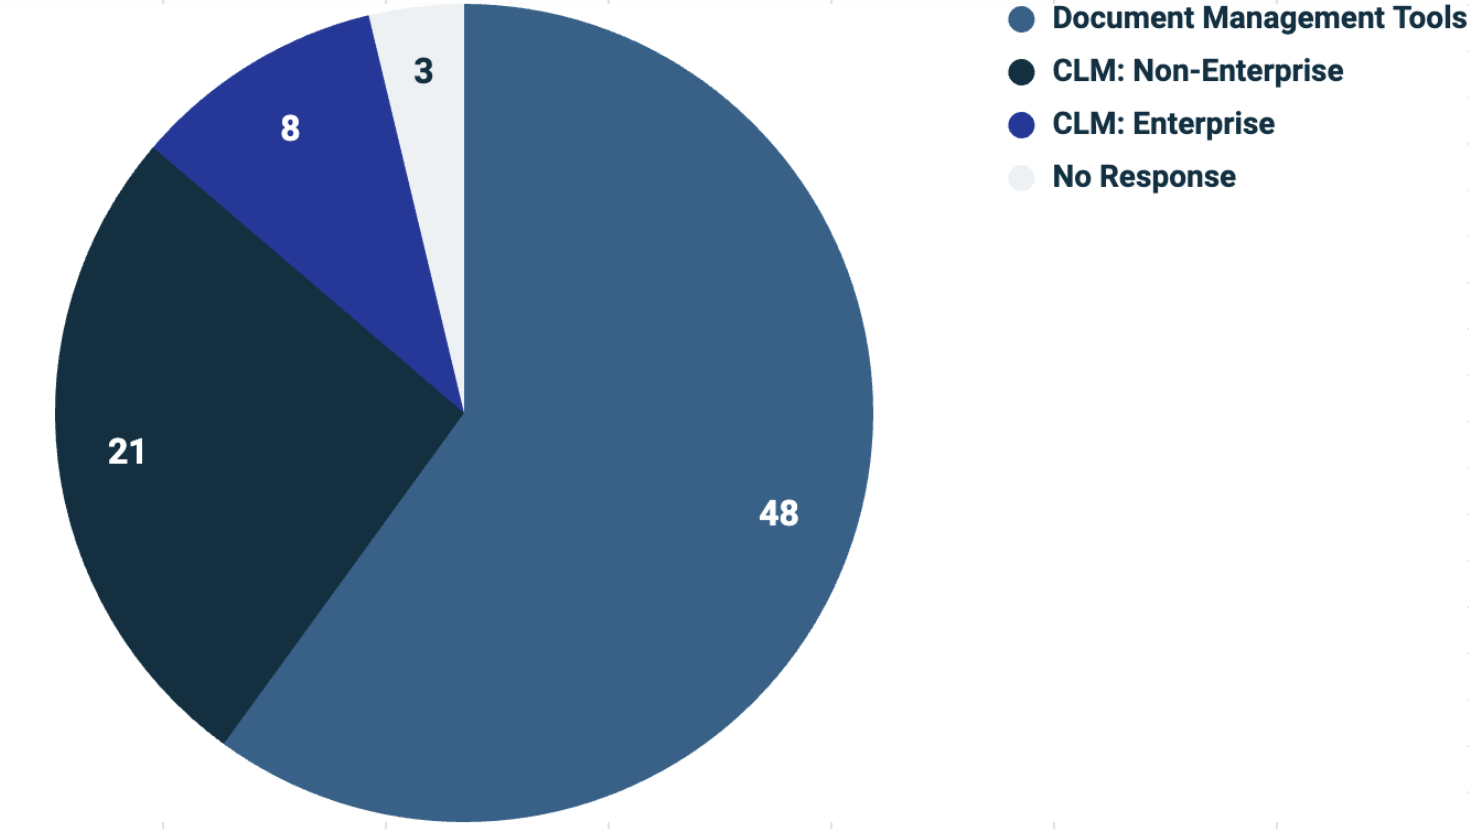 Pie Graph showing Document Management Tools as the largest segment in Contract Management Solutions